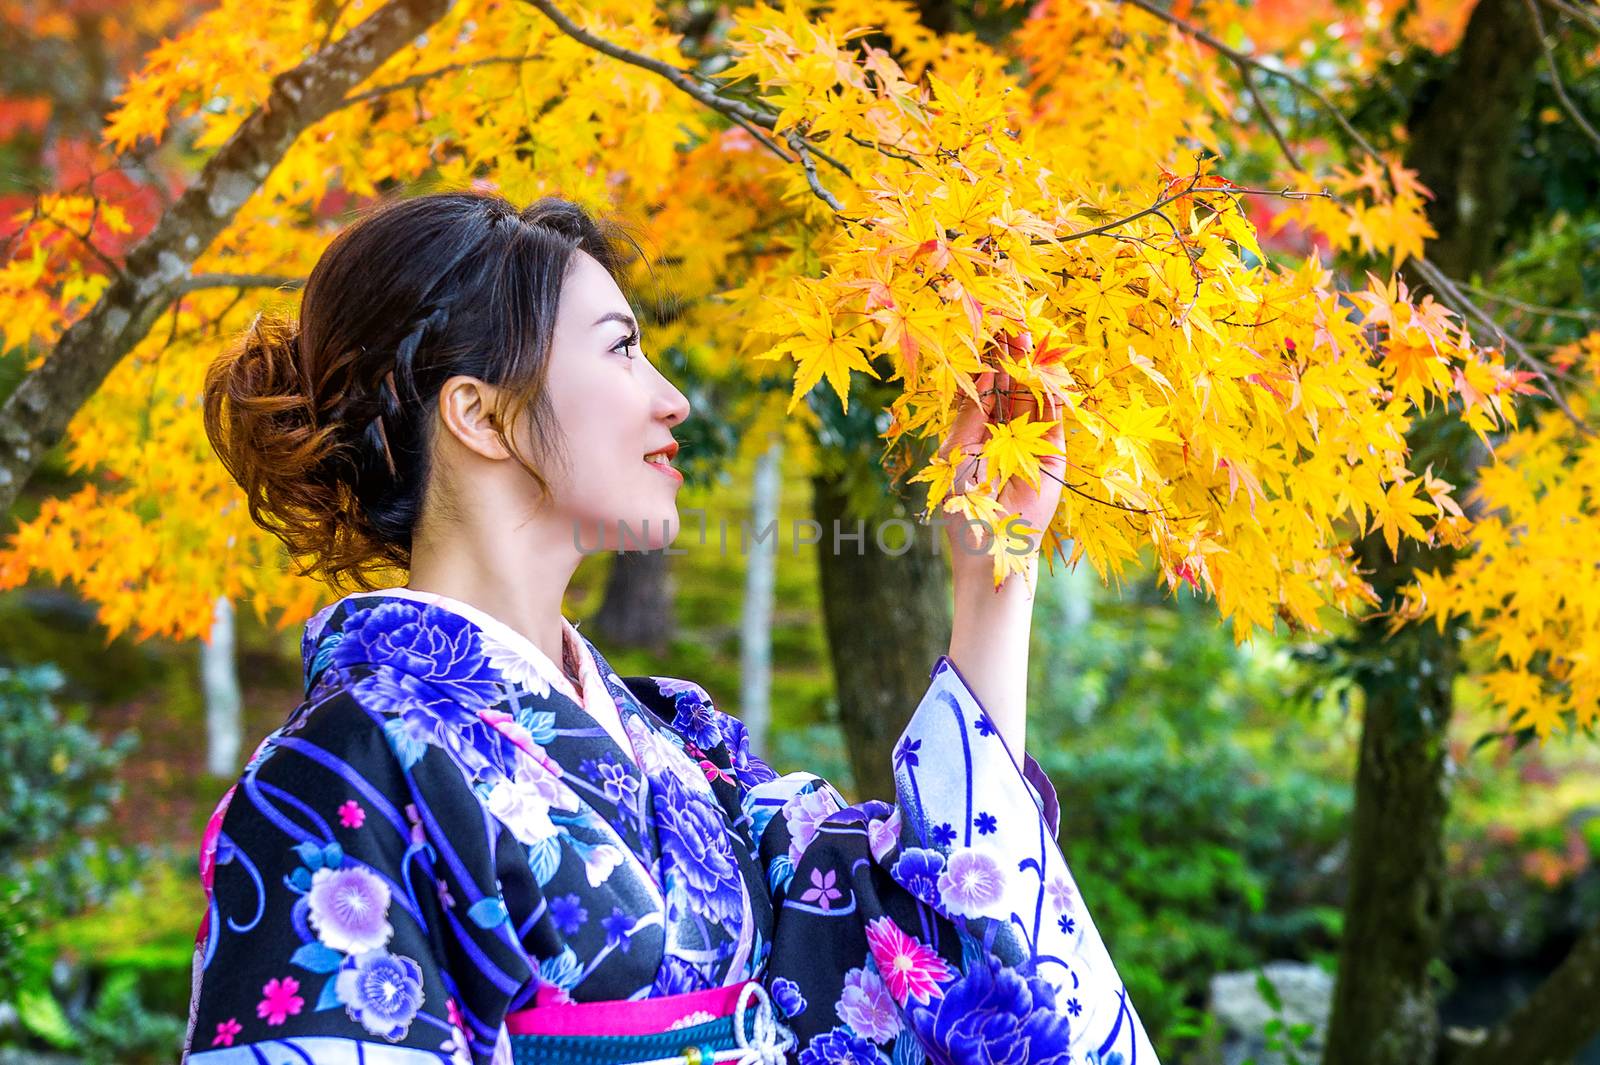 Asian woman wearing japanese traditional kimono in autumn park. Japan by gutarphotoghaphy